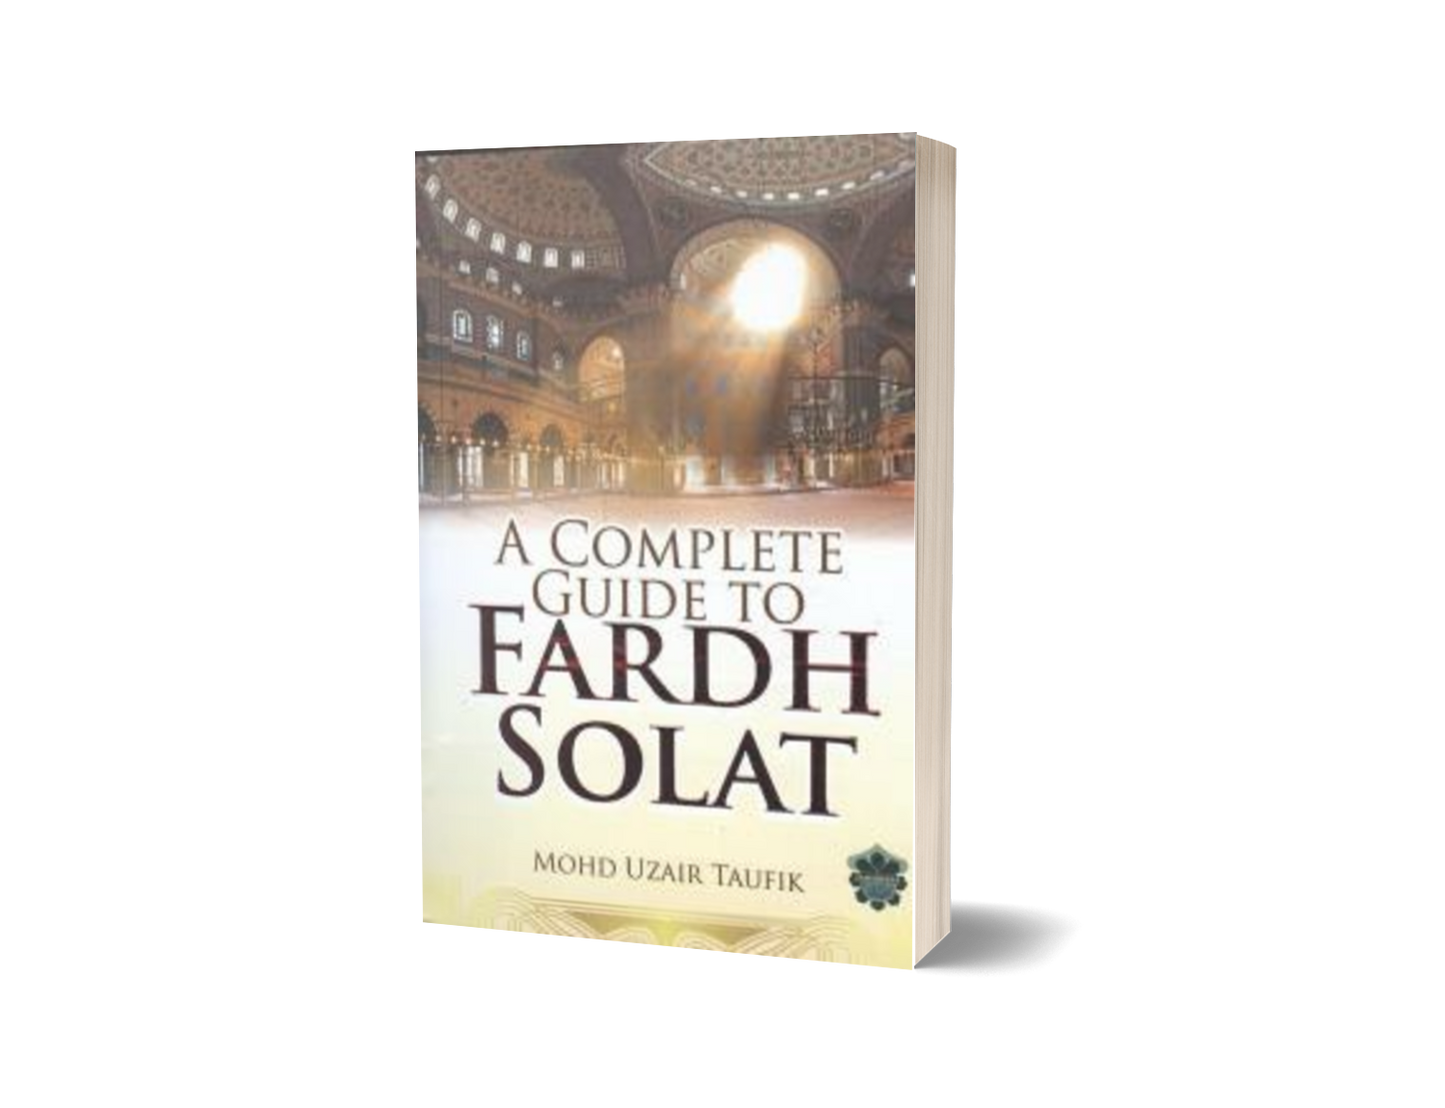 A Complete Guide To Fardh Solat / Sm